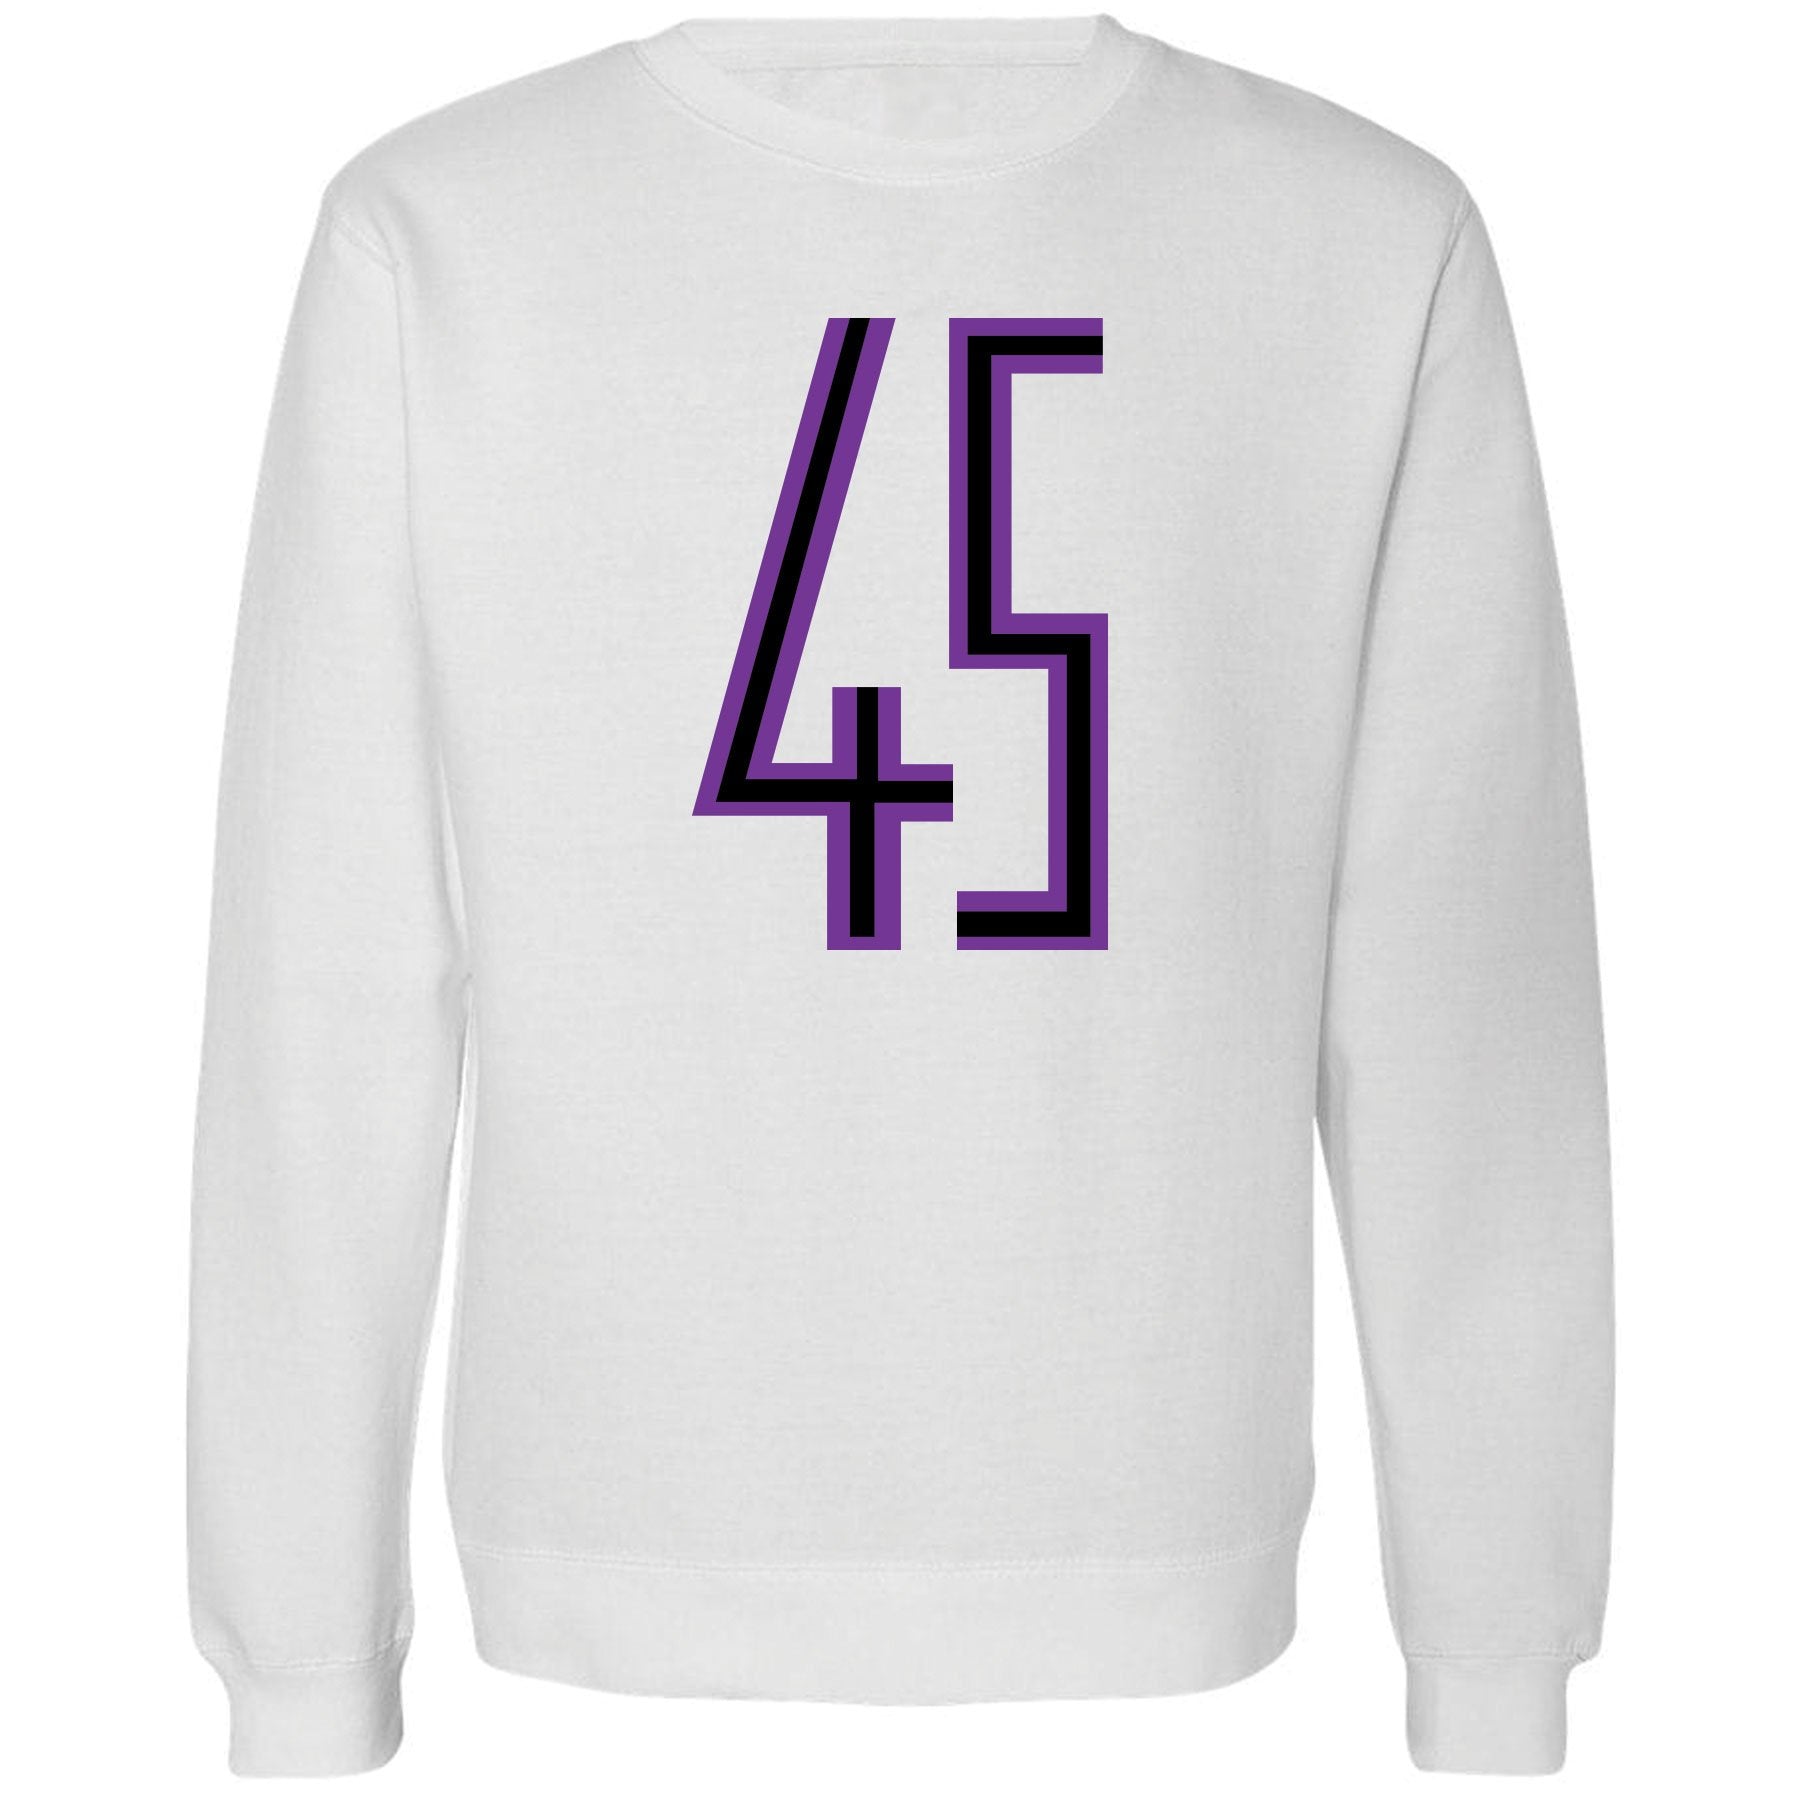 Printed on the front of the Jordan 11 Concord 45 white sneaker matching white crewneck sweatshirt has the 45 logo printed in purpled and black